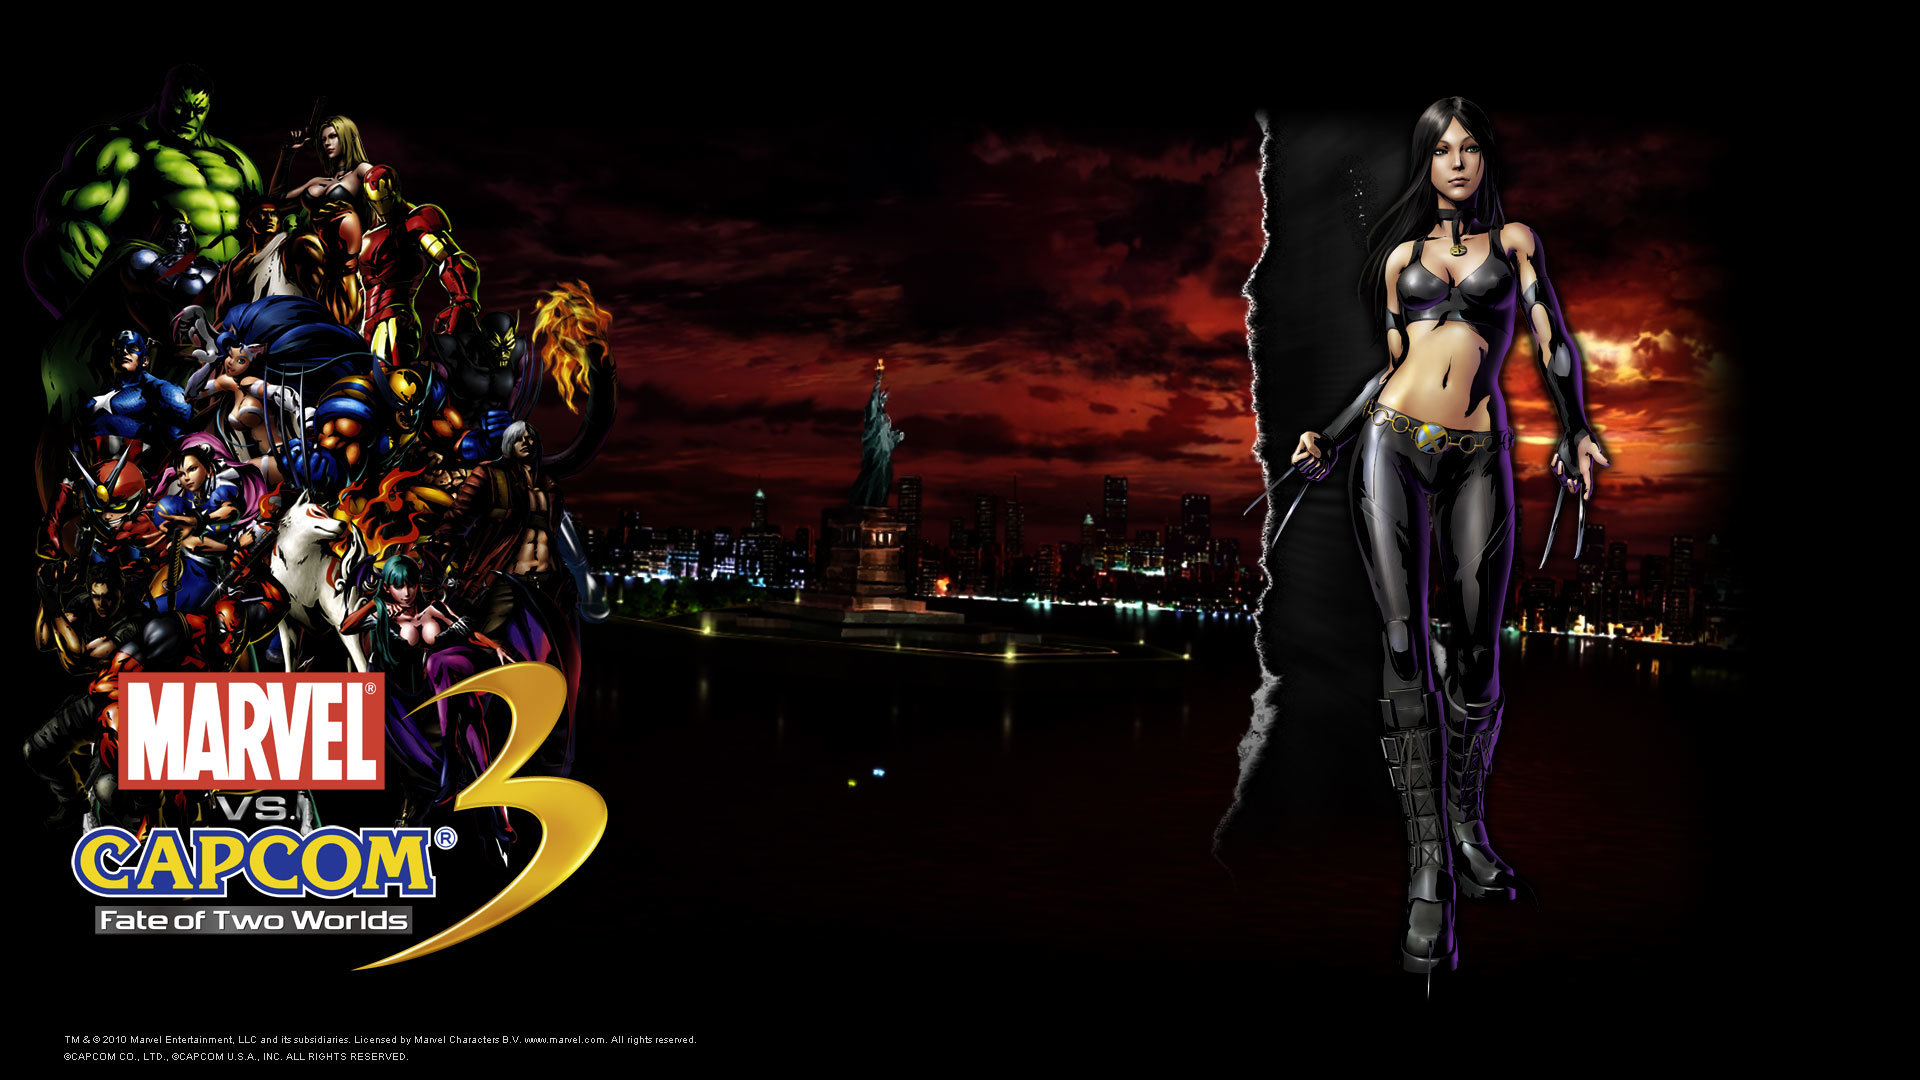 Download full hd 1080p Marvel Vs. Capcom 3: Fate Of Two Worlds computer wallpaper ID:298429 for free